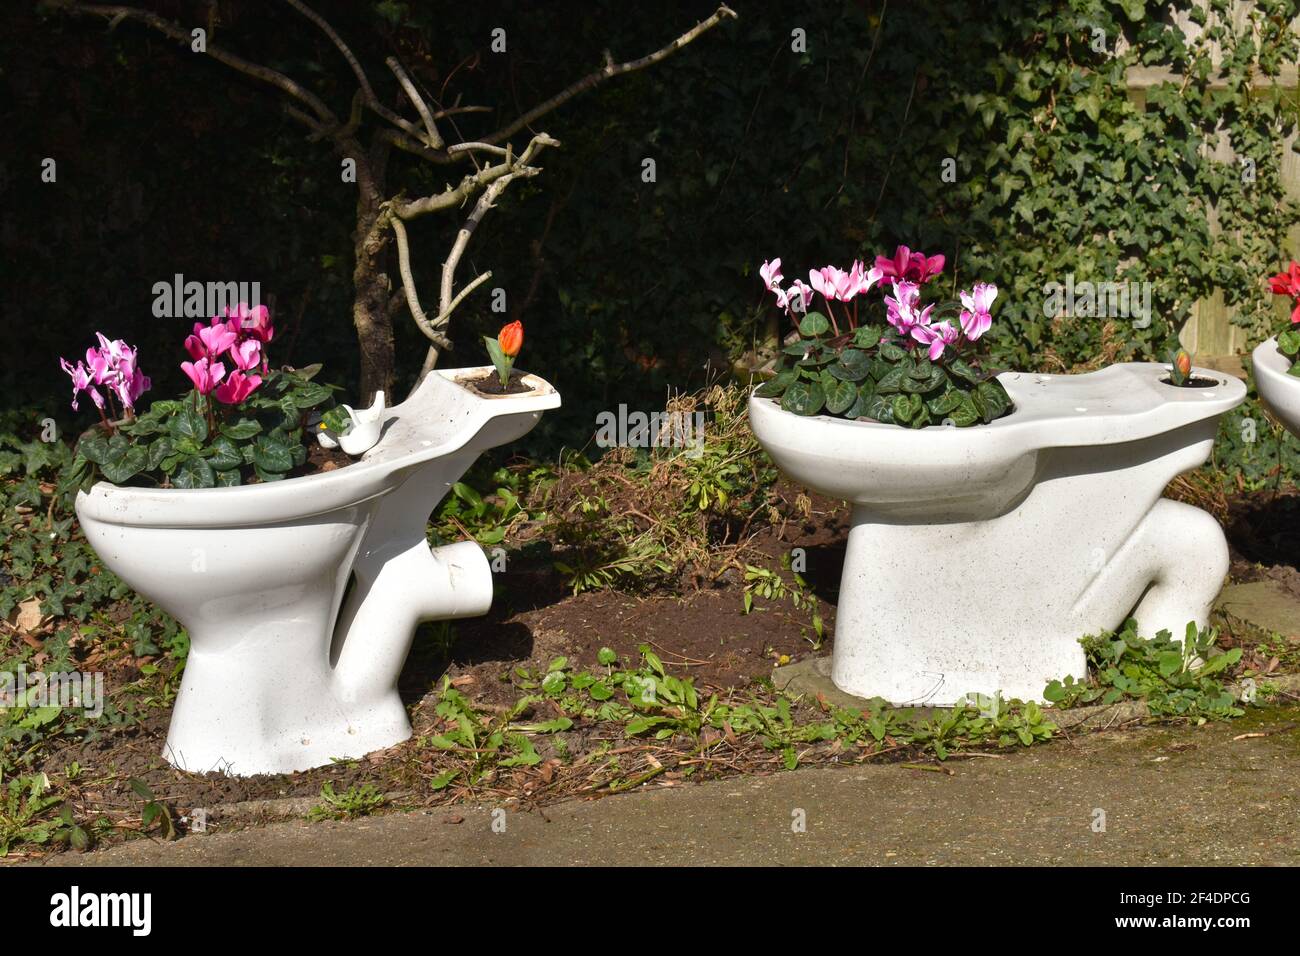 Toilets turned into planters by using the bowl for growing  bulbous flowers A used toilet makes excellent pot or a bird bath displayed it in your yard Stock Photo